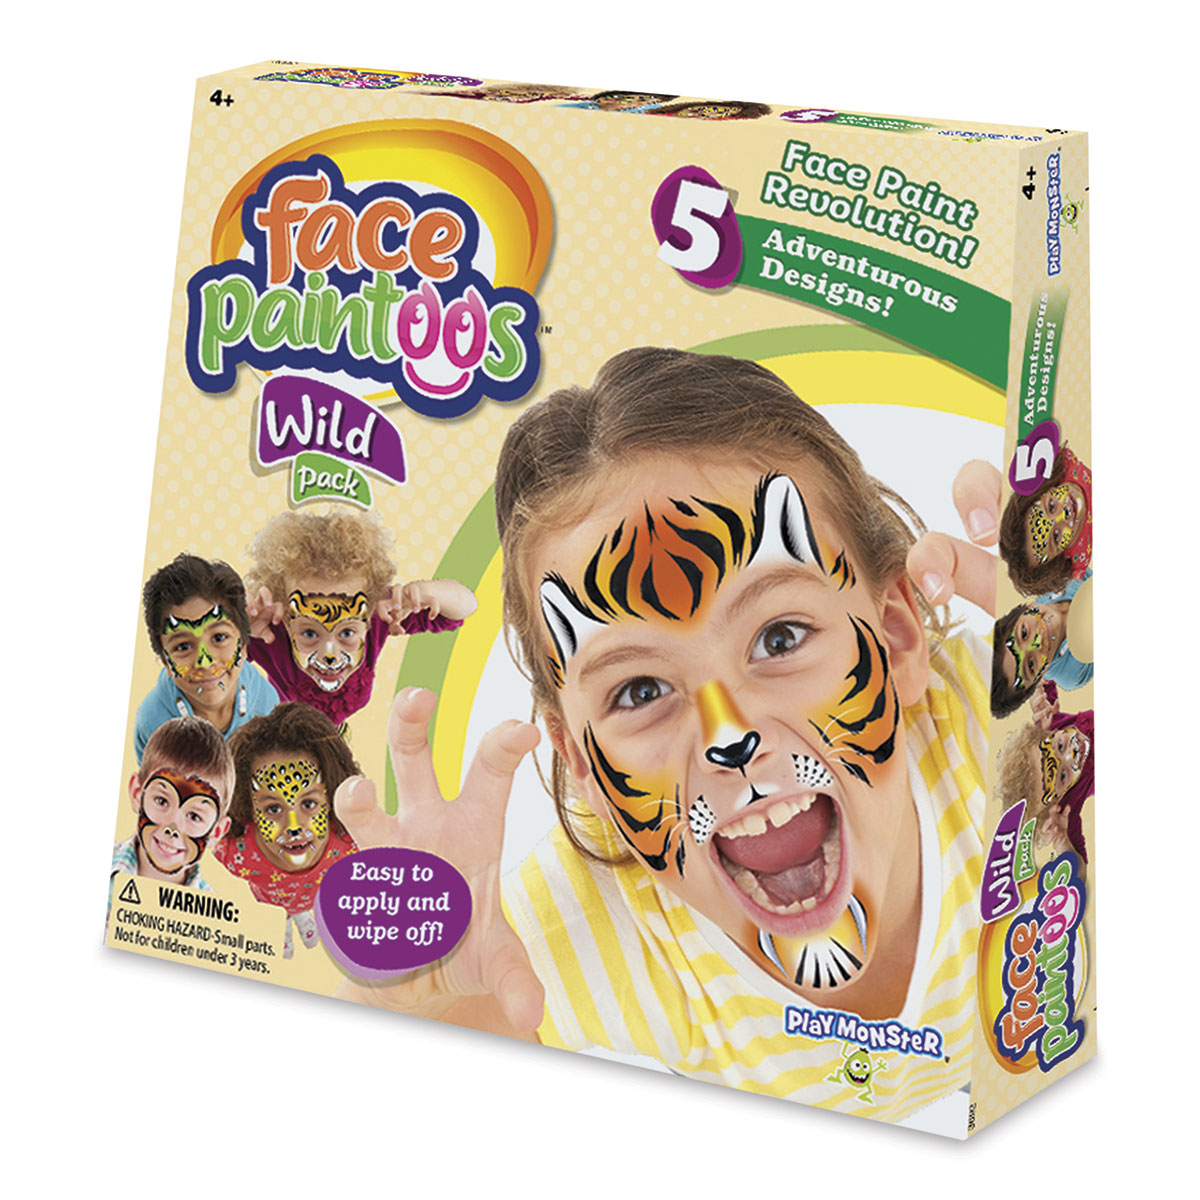 Face Paintoos Temporary Tattoos - Wild Pack